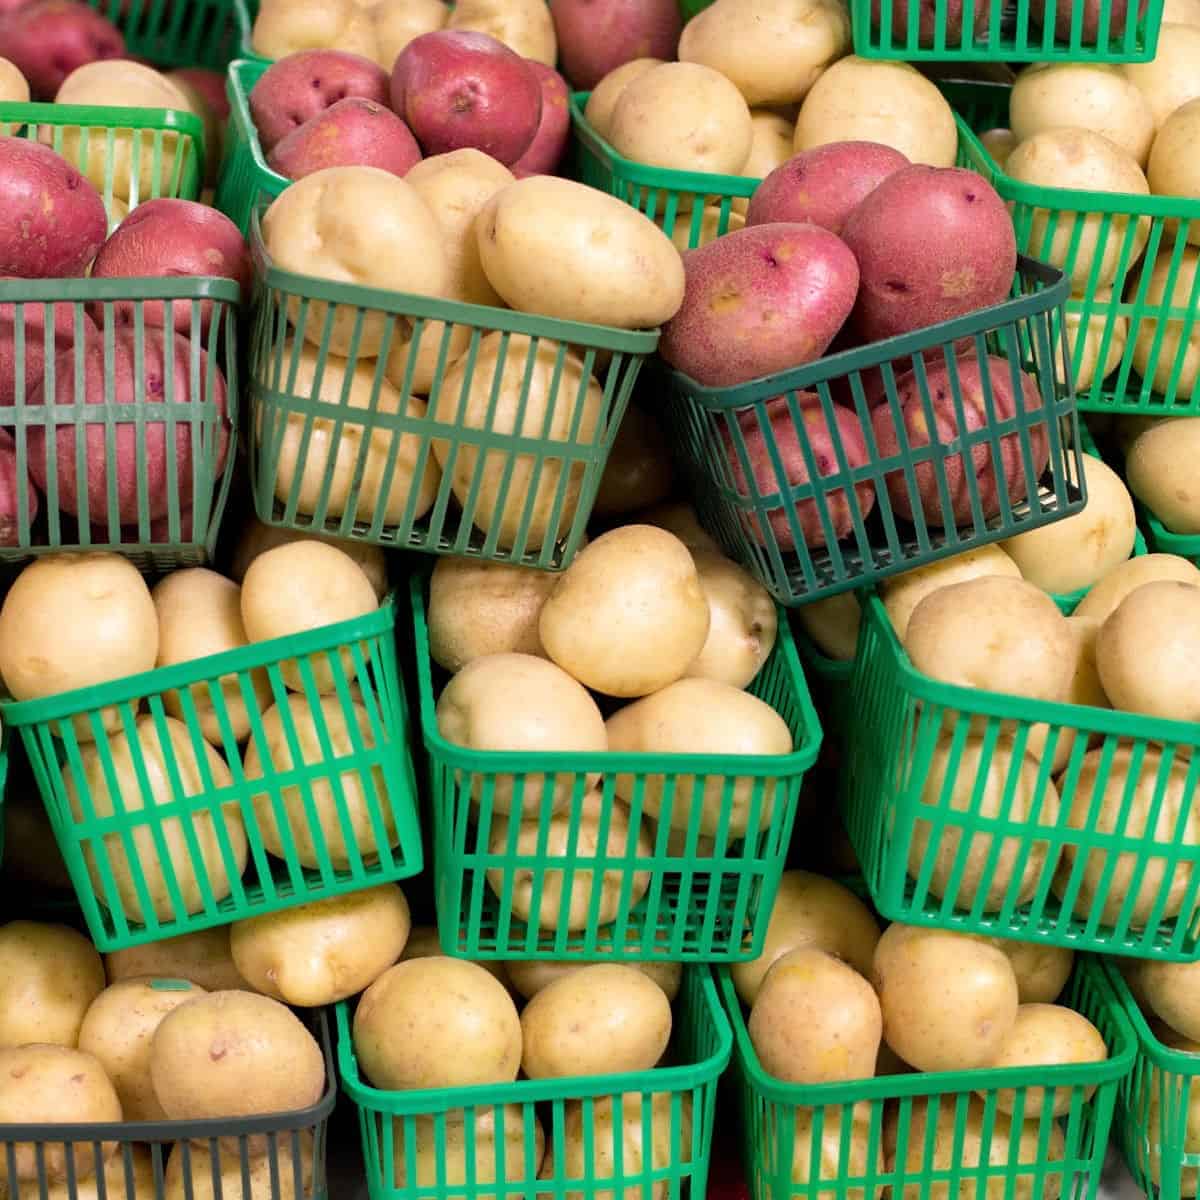 Stacks of red and gold potatoes in green plastic baskets.